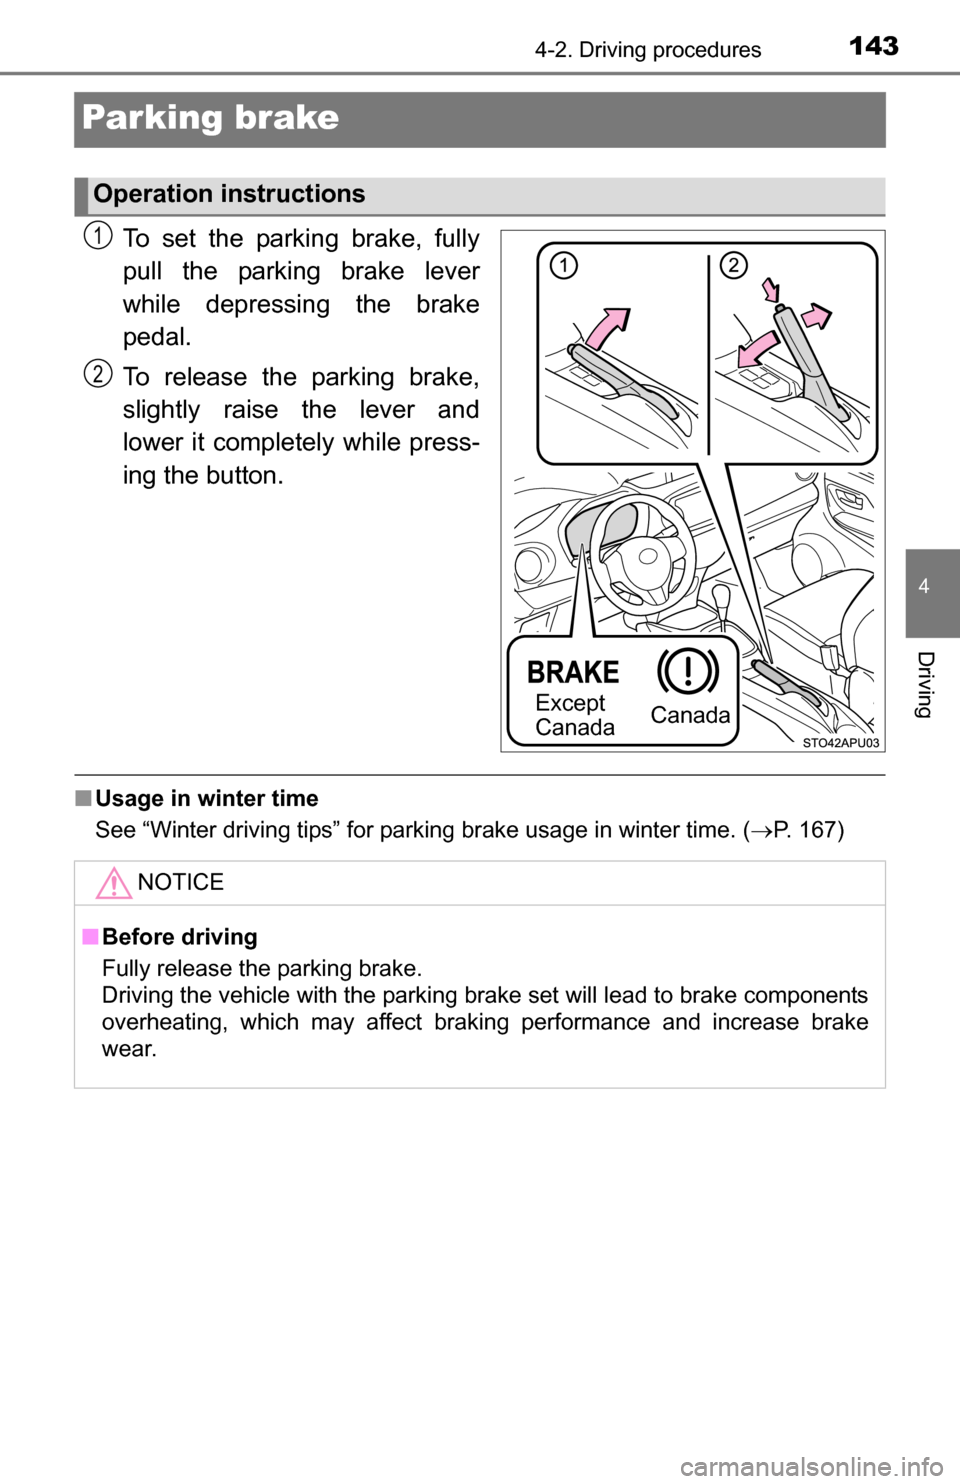 TOYOTA YARIS 2016 3.G Owners Manual 1434-2. Driving procedures
4
Driving
Parking brake
To set the parking brake, fully
pull the parking brake lever
while depressing the brake
pedal.
To release the parking brake,
slightly raise the lever